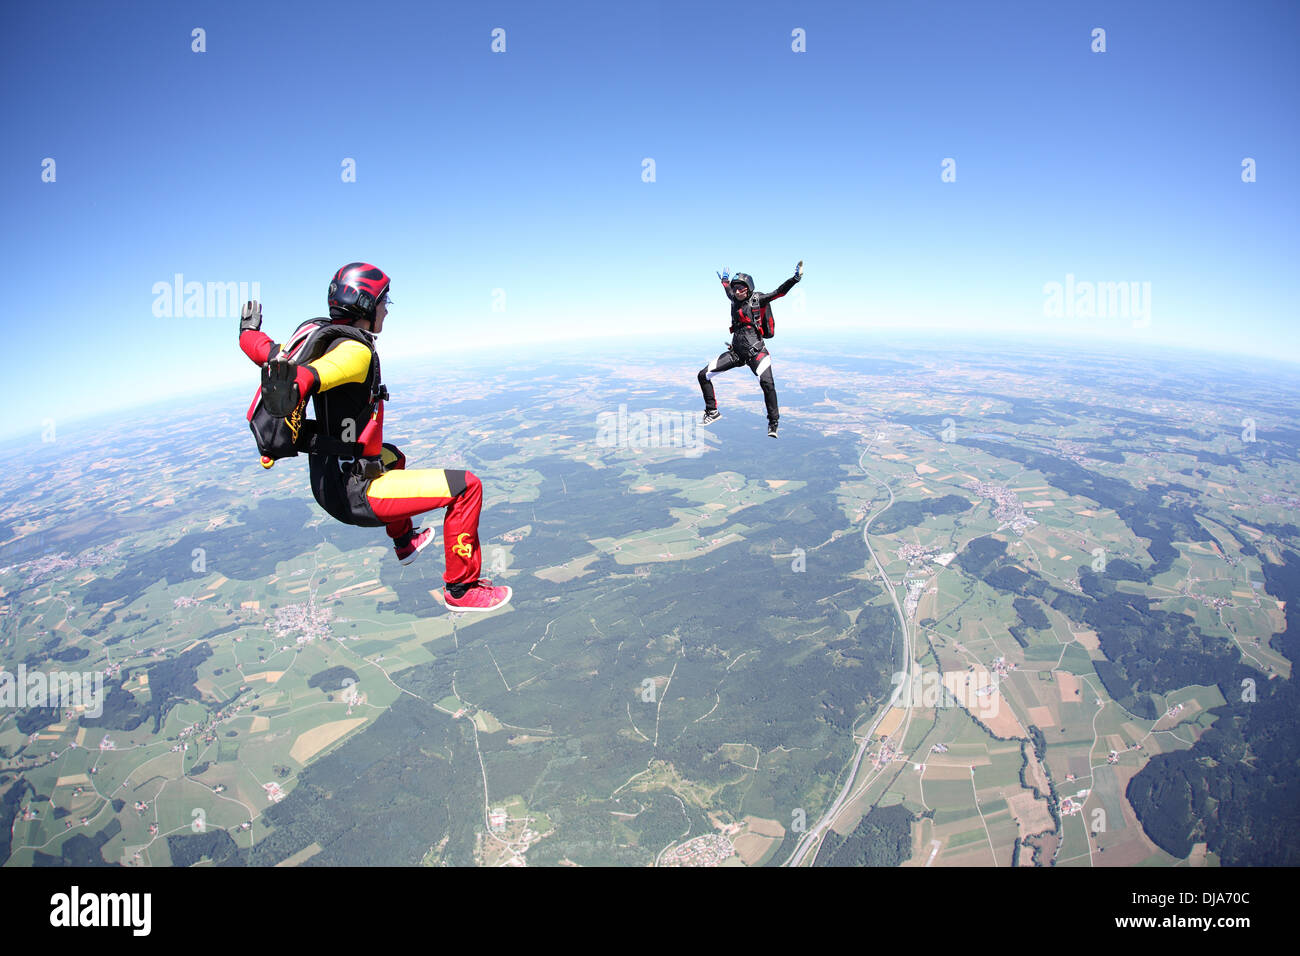 Skydivers are jumping out of an airplane and playing together. It is fun for all to fly free over nice landscape. Stock Photo